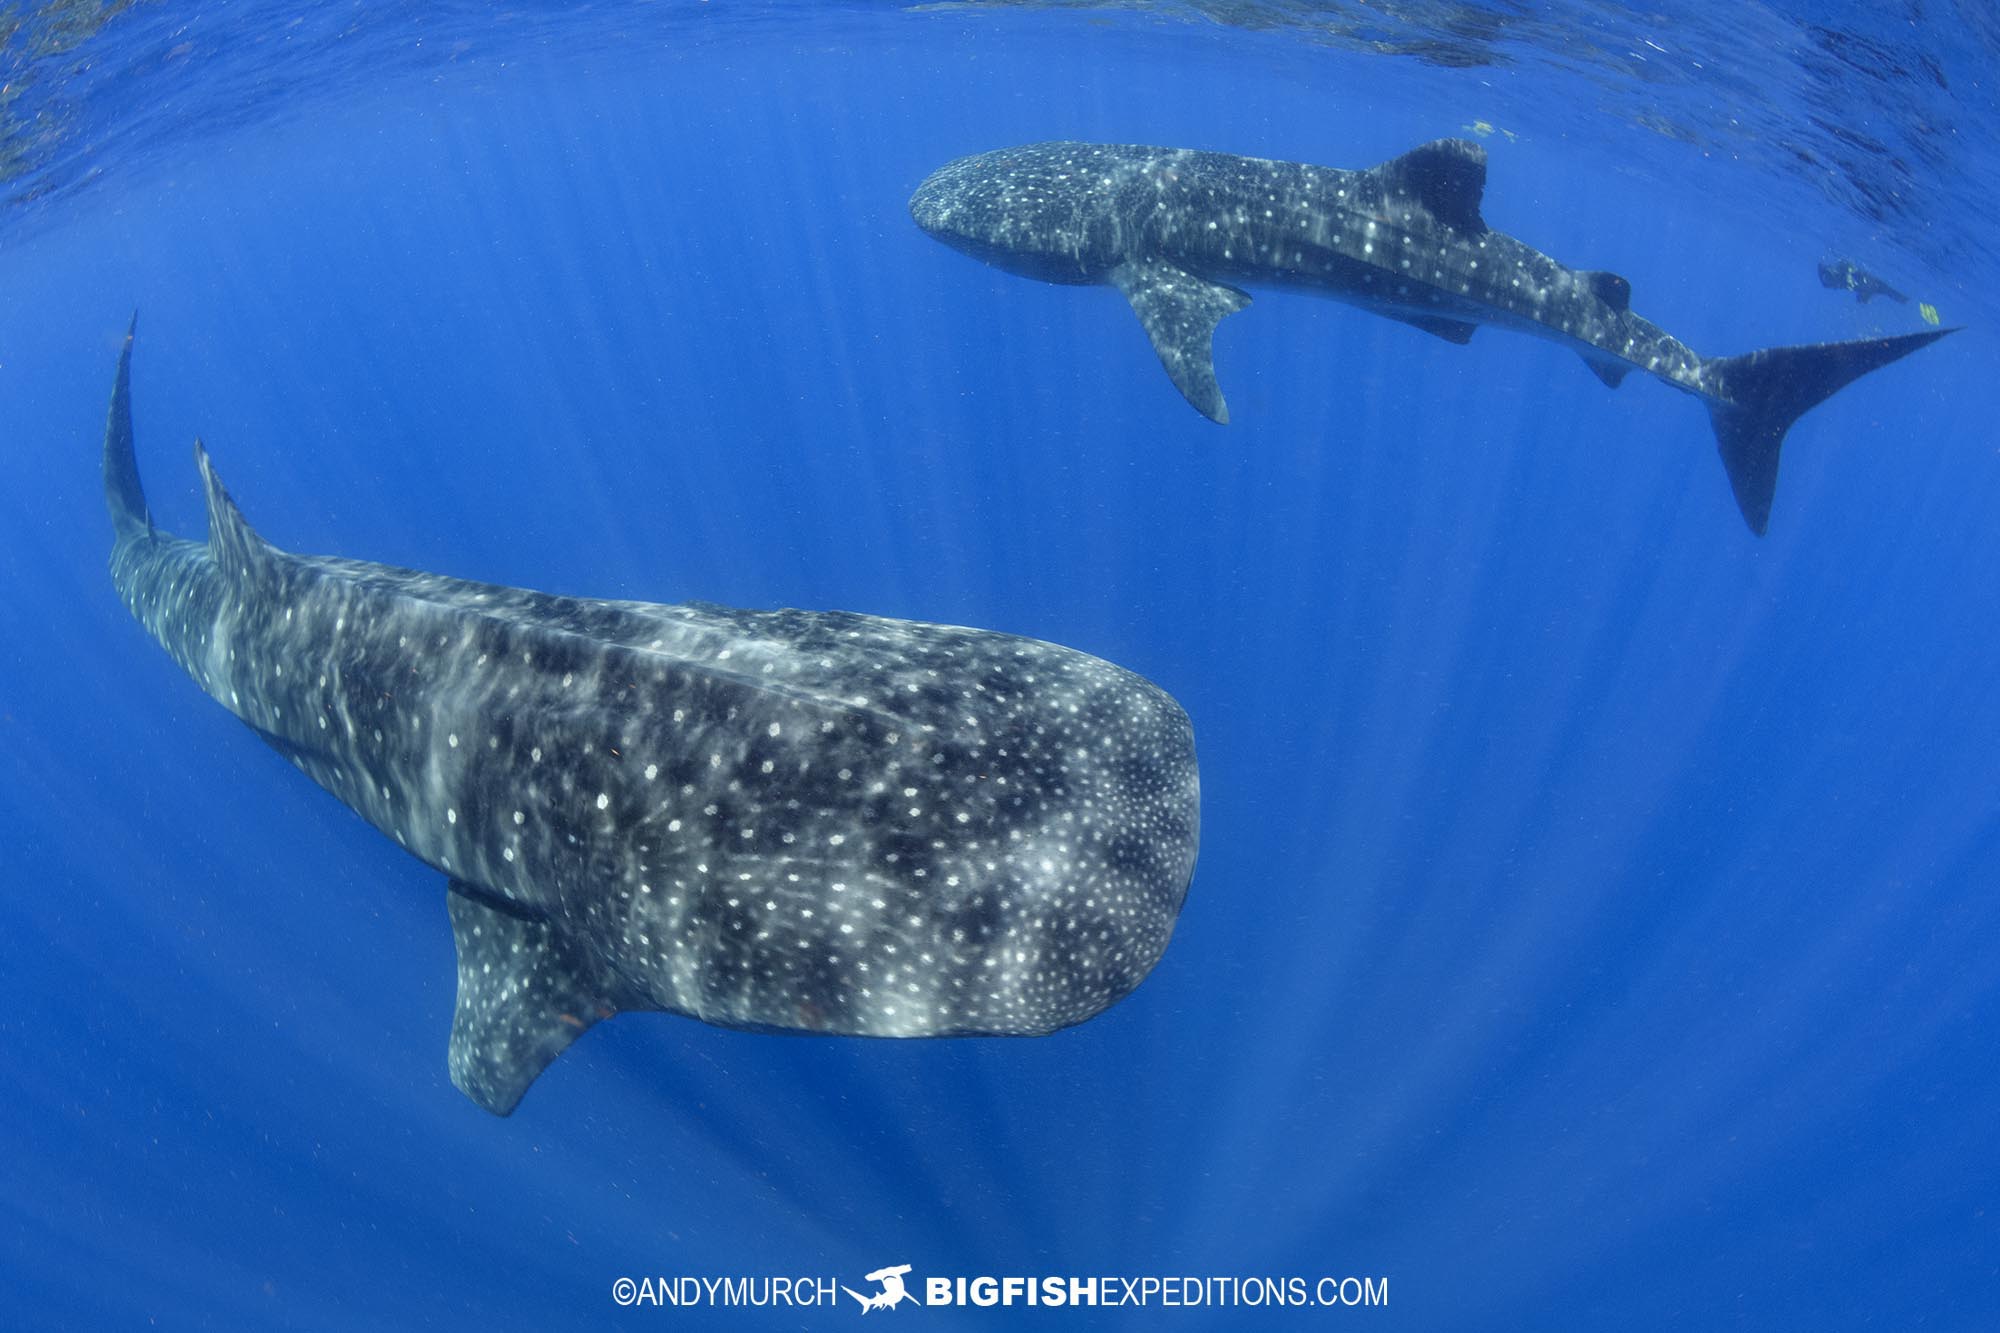 Snorkeling with Whale Sharks near Cancun.